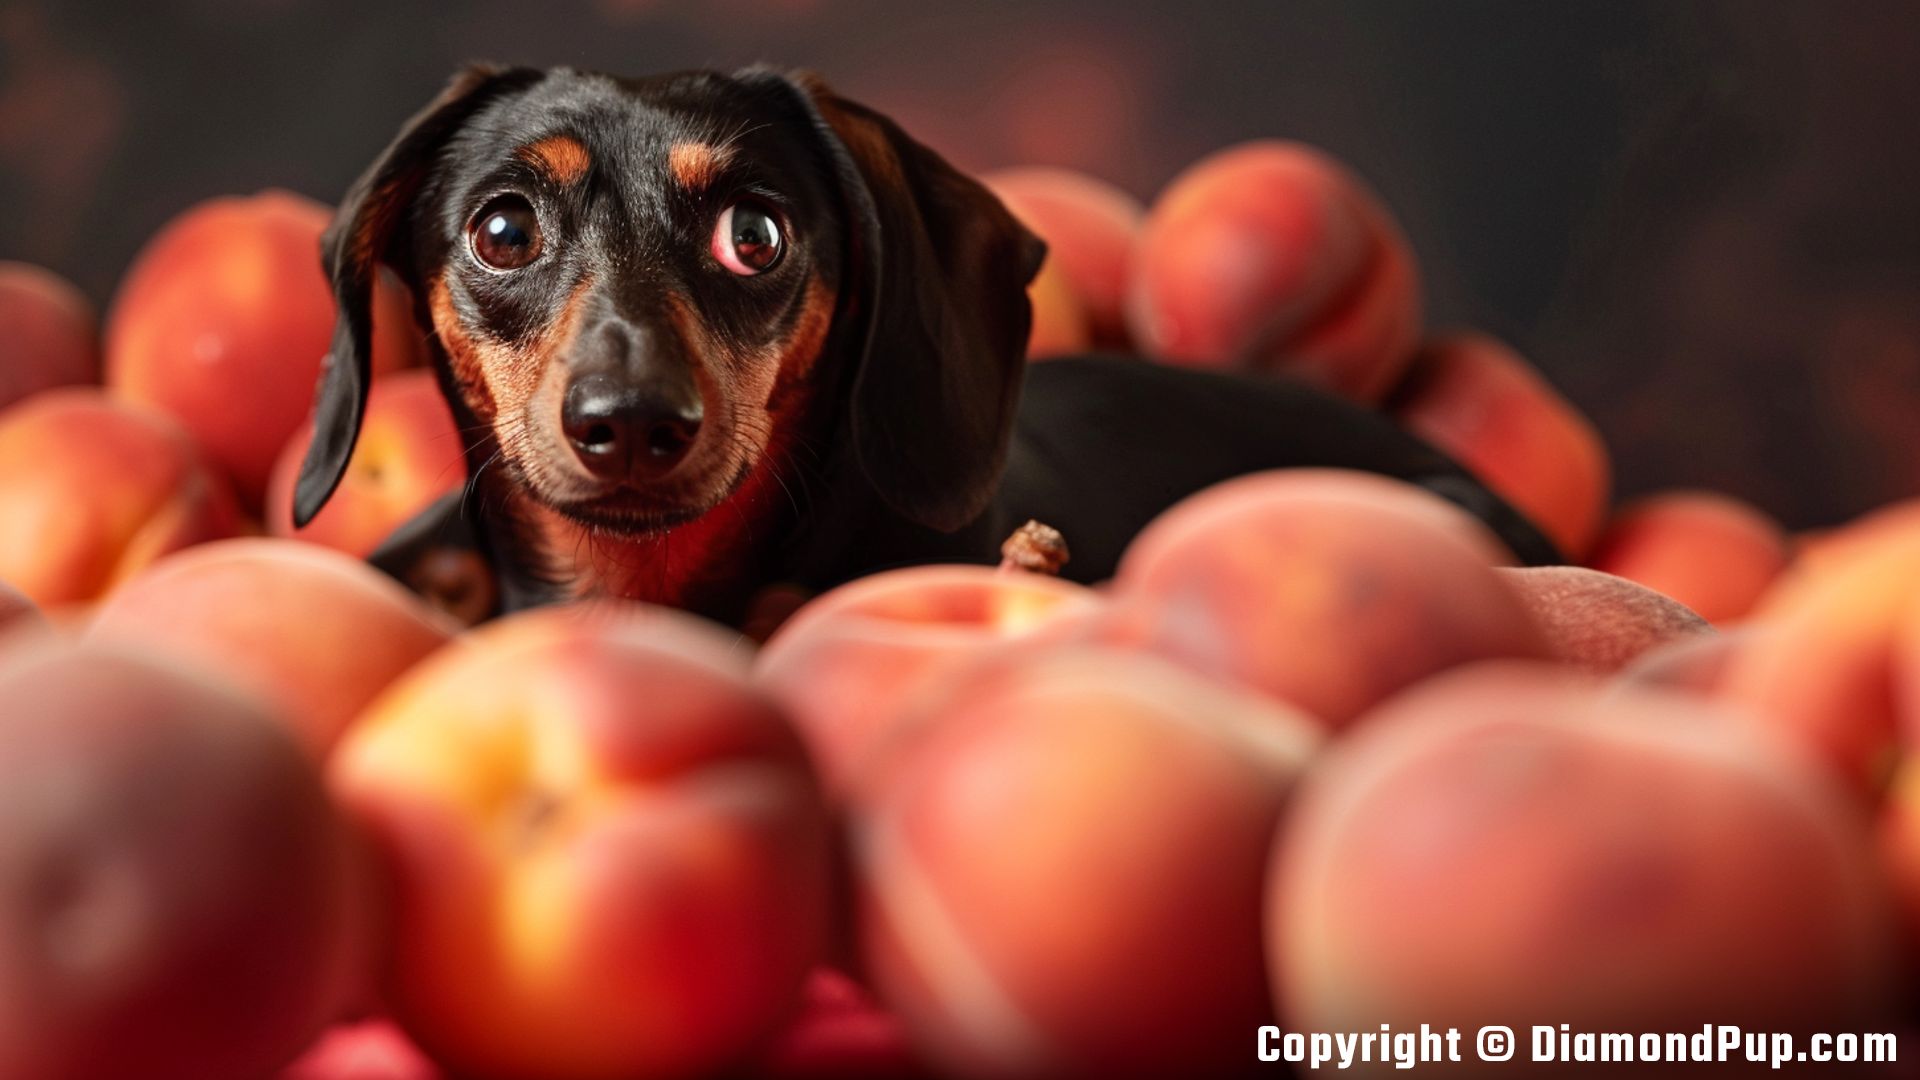 Image of an Adorable Dachshund Eating Peaches